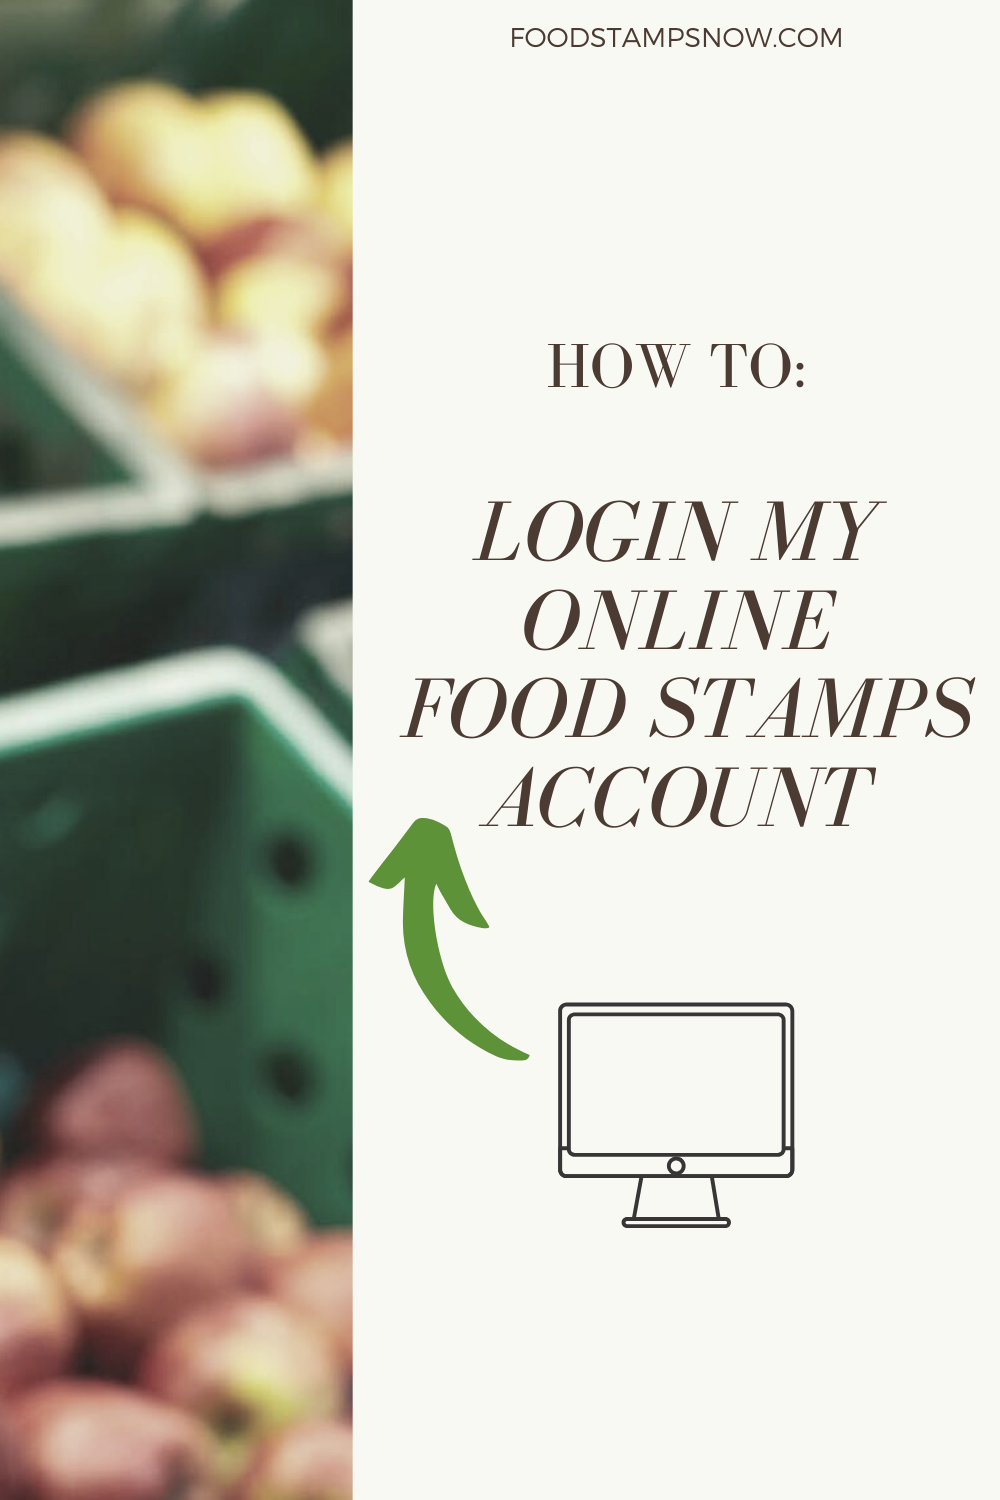 Login your online Food Stamps Account